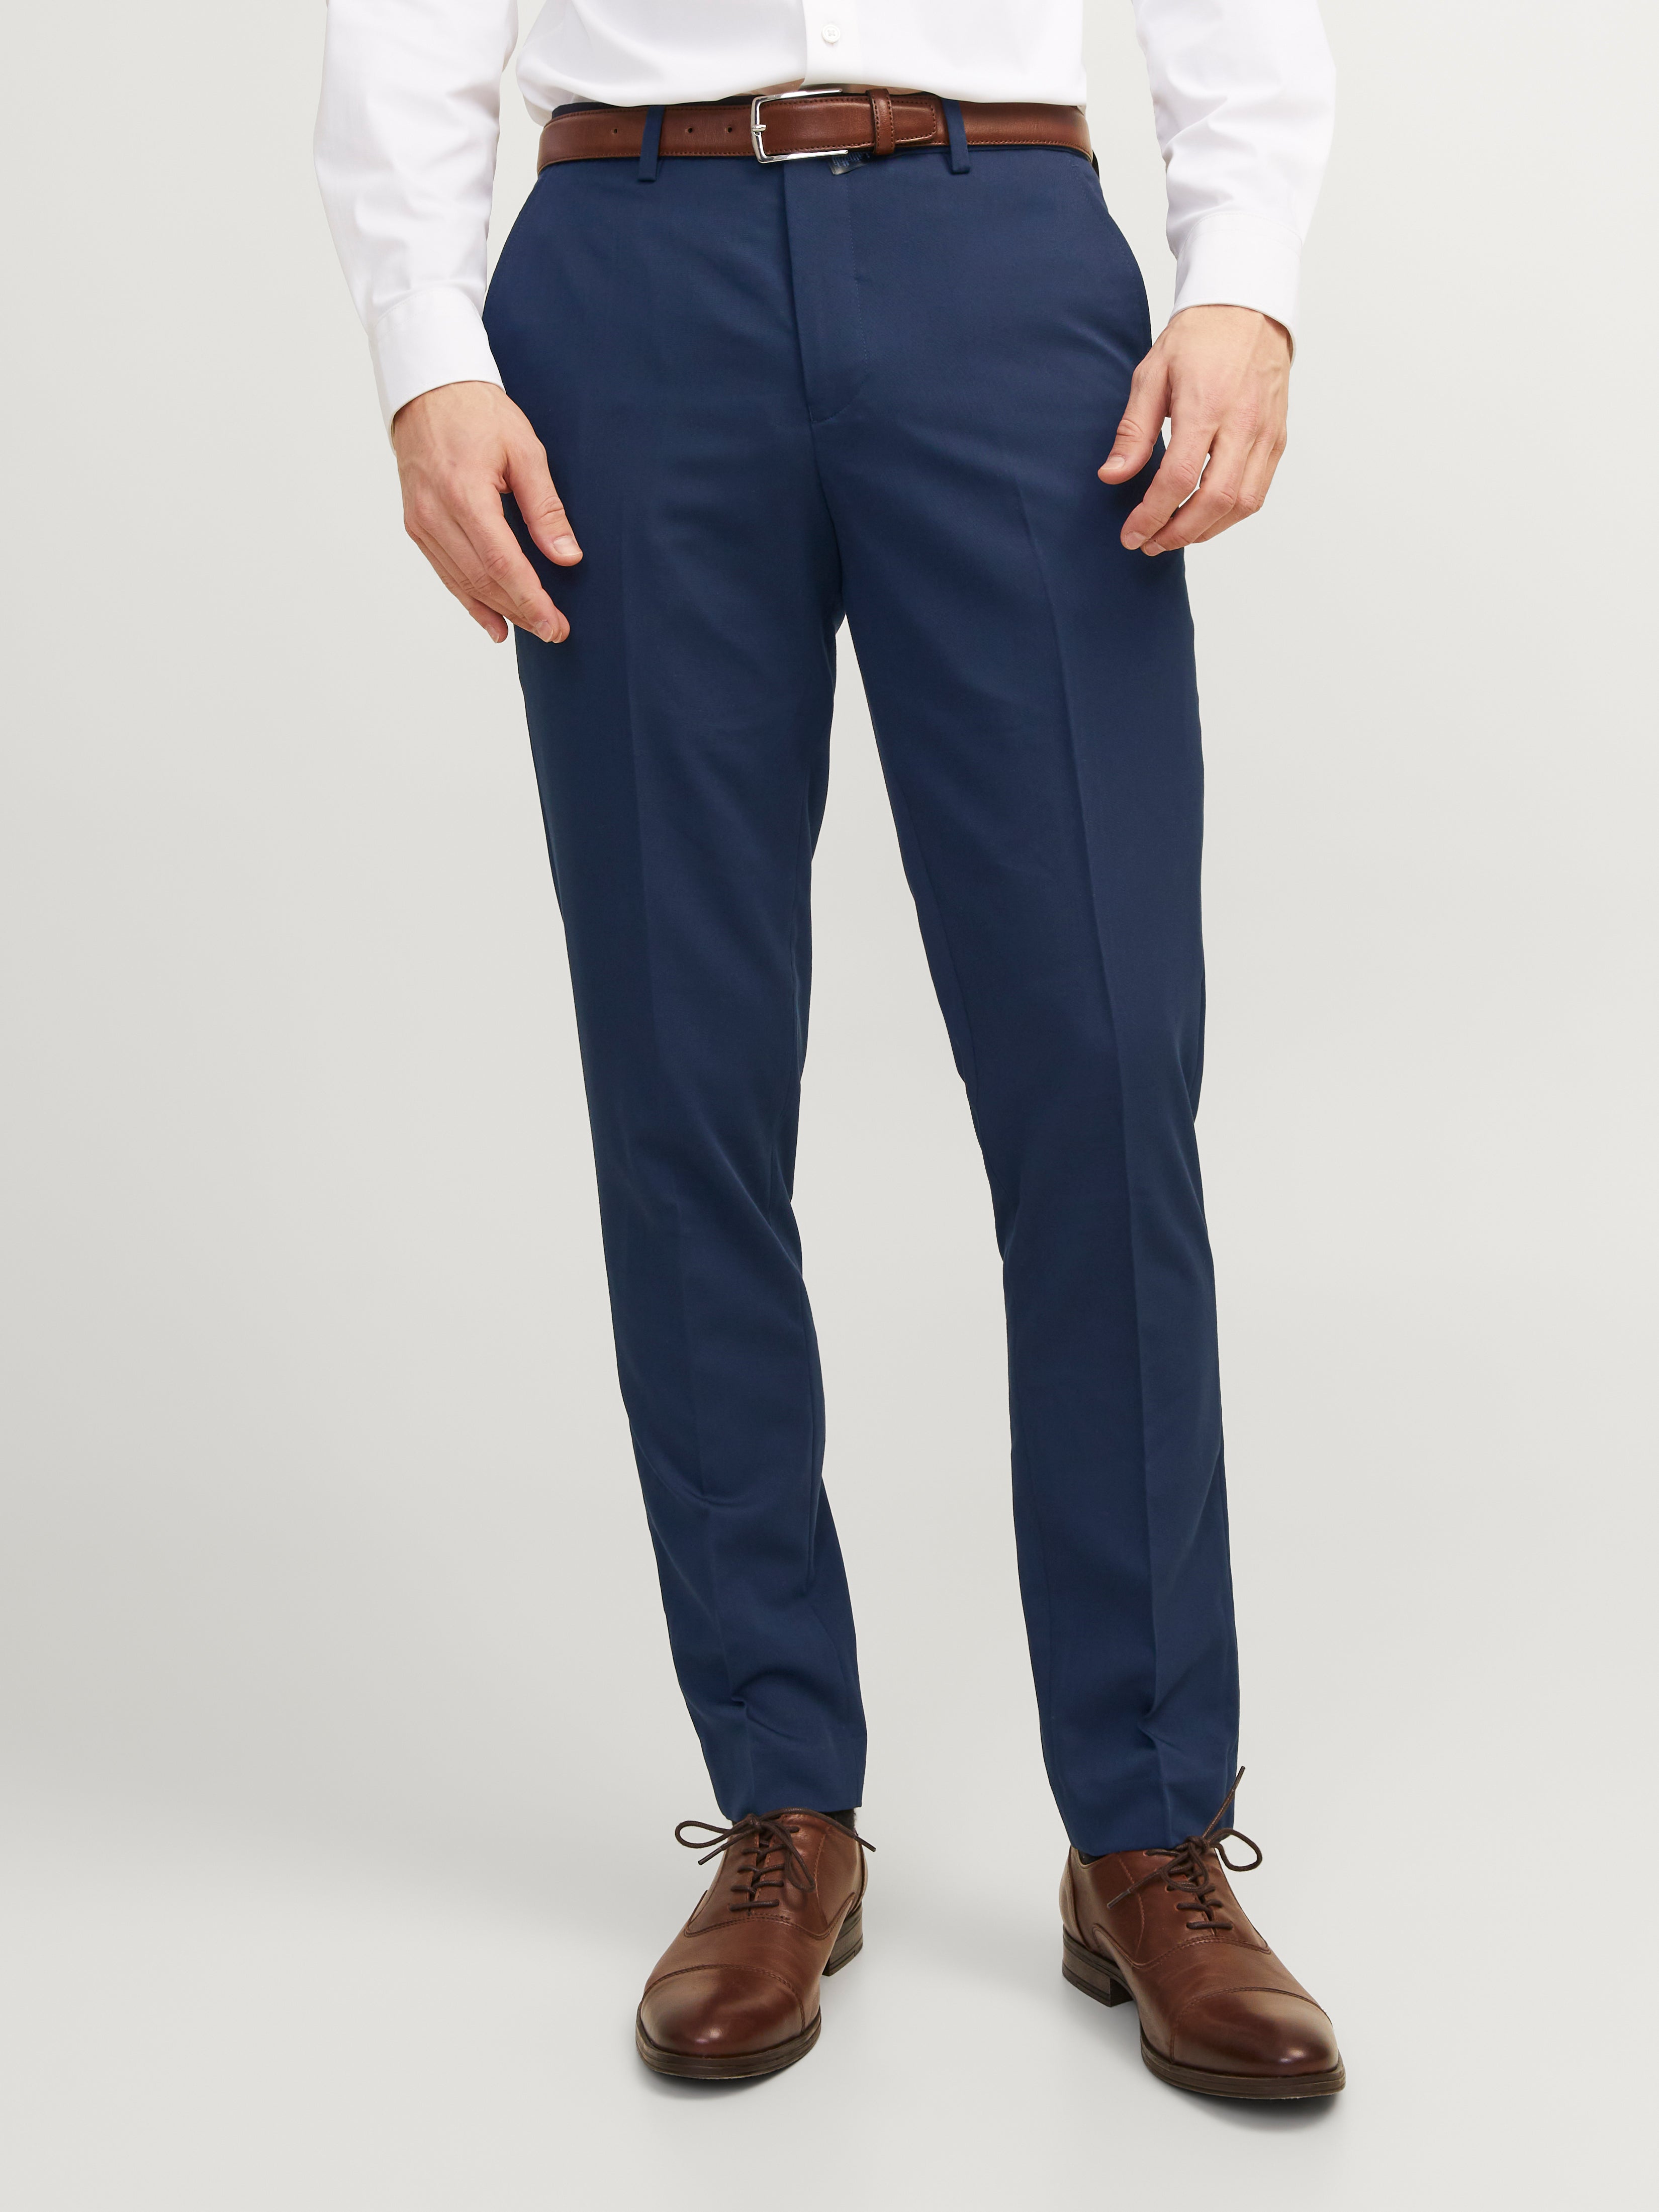 Taylor & Wright Albert Charcoal Tailored Fit Suit Trousers - Matalan